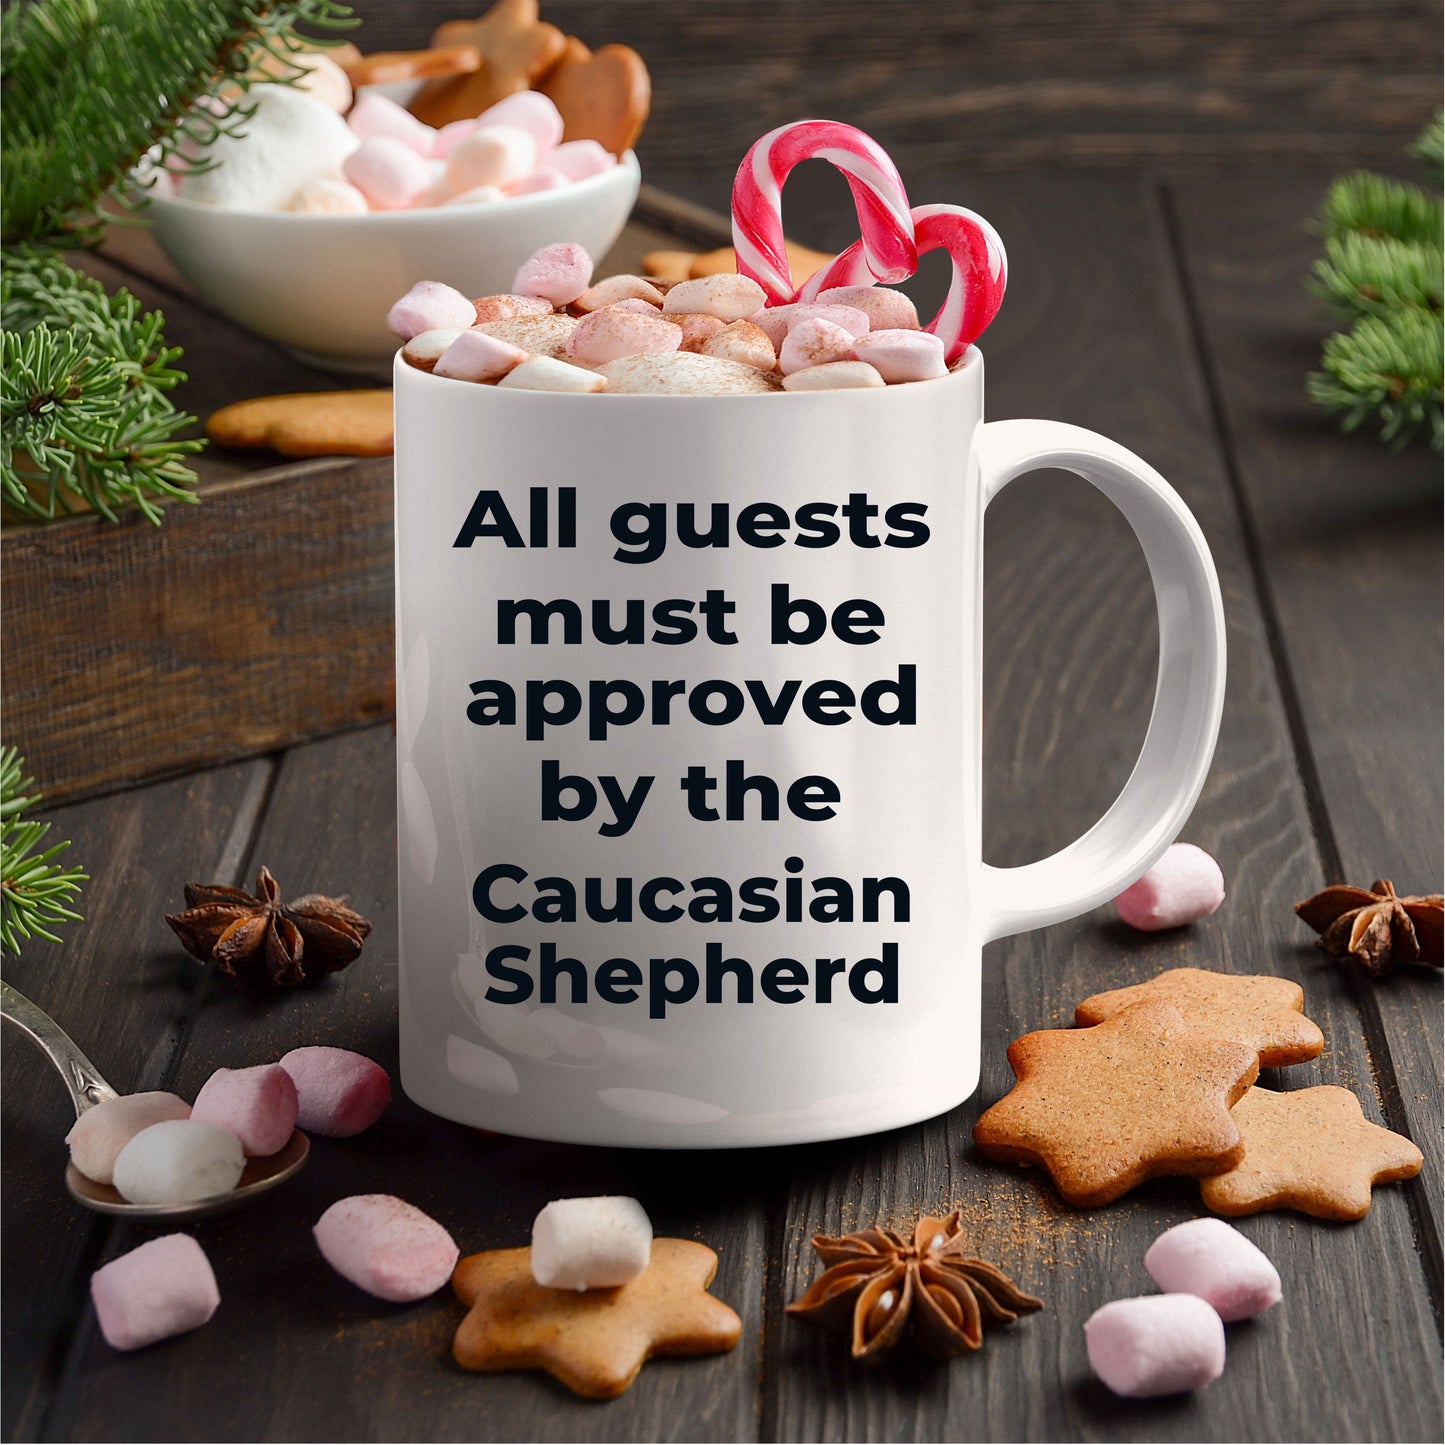 Caucasian Shepherd Dog Coffee Mug - All guests must be approved by the Caucasian Shepherd